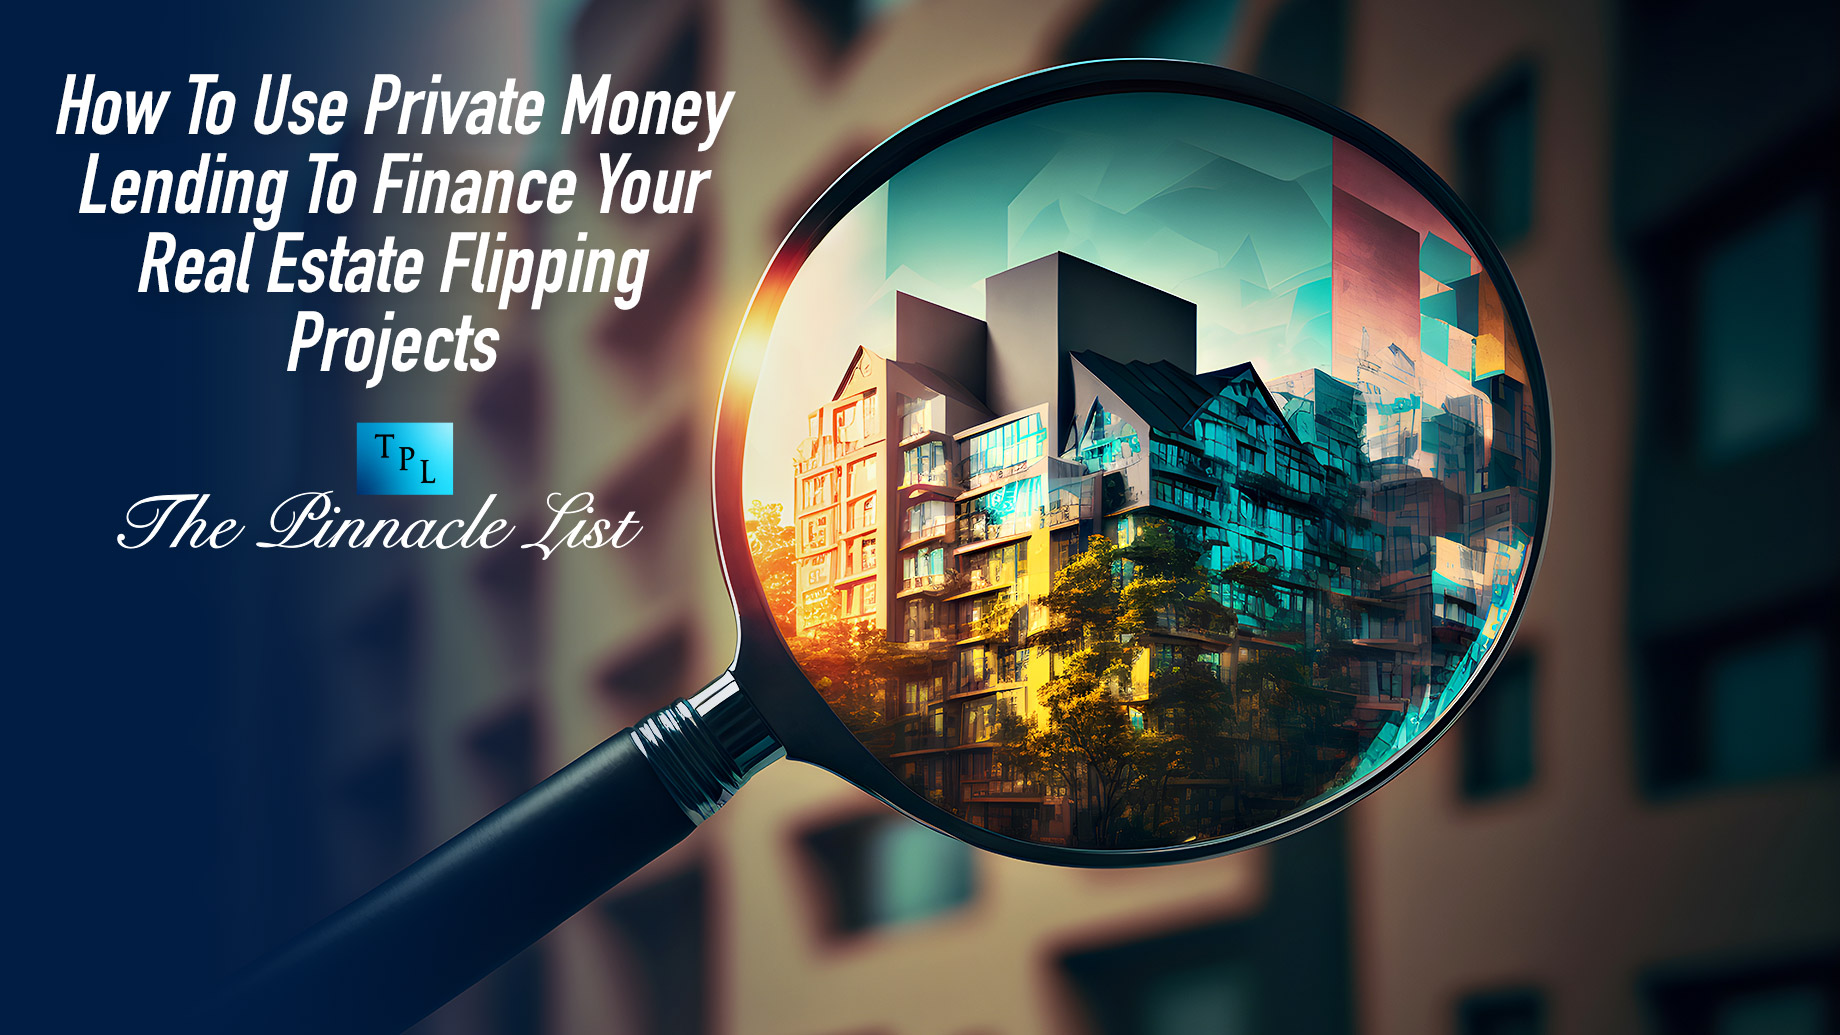 How To Use Private Money Lending To Finance Your Real Estate Flipping Projects